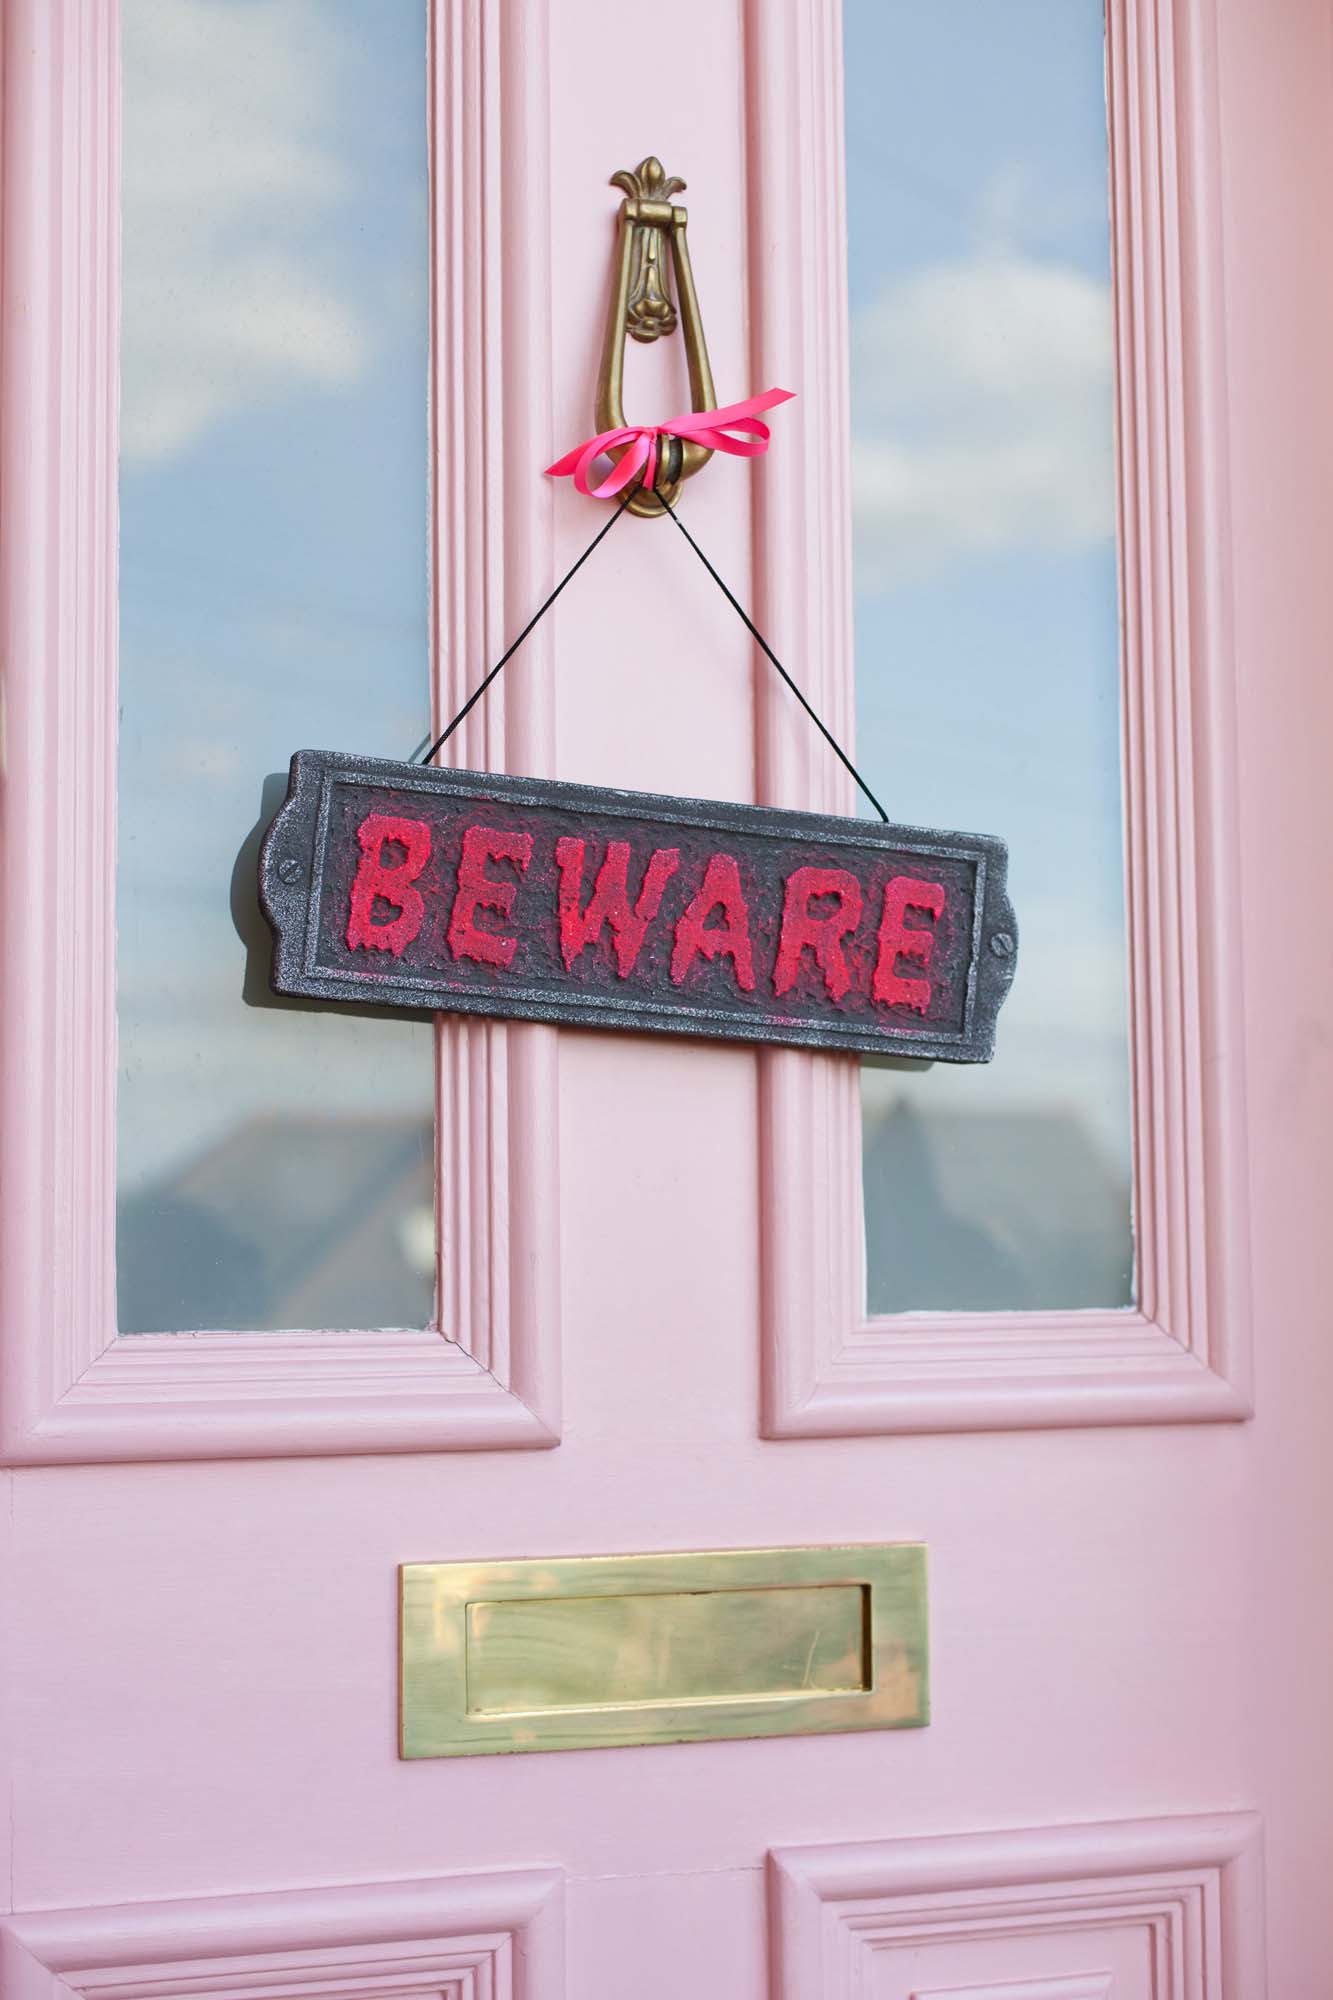 Farrow & Ball Nancy's Blushed pink front door with Beware sign